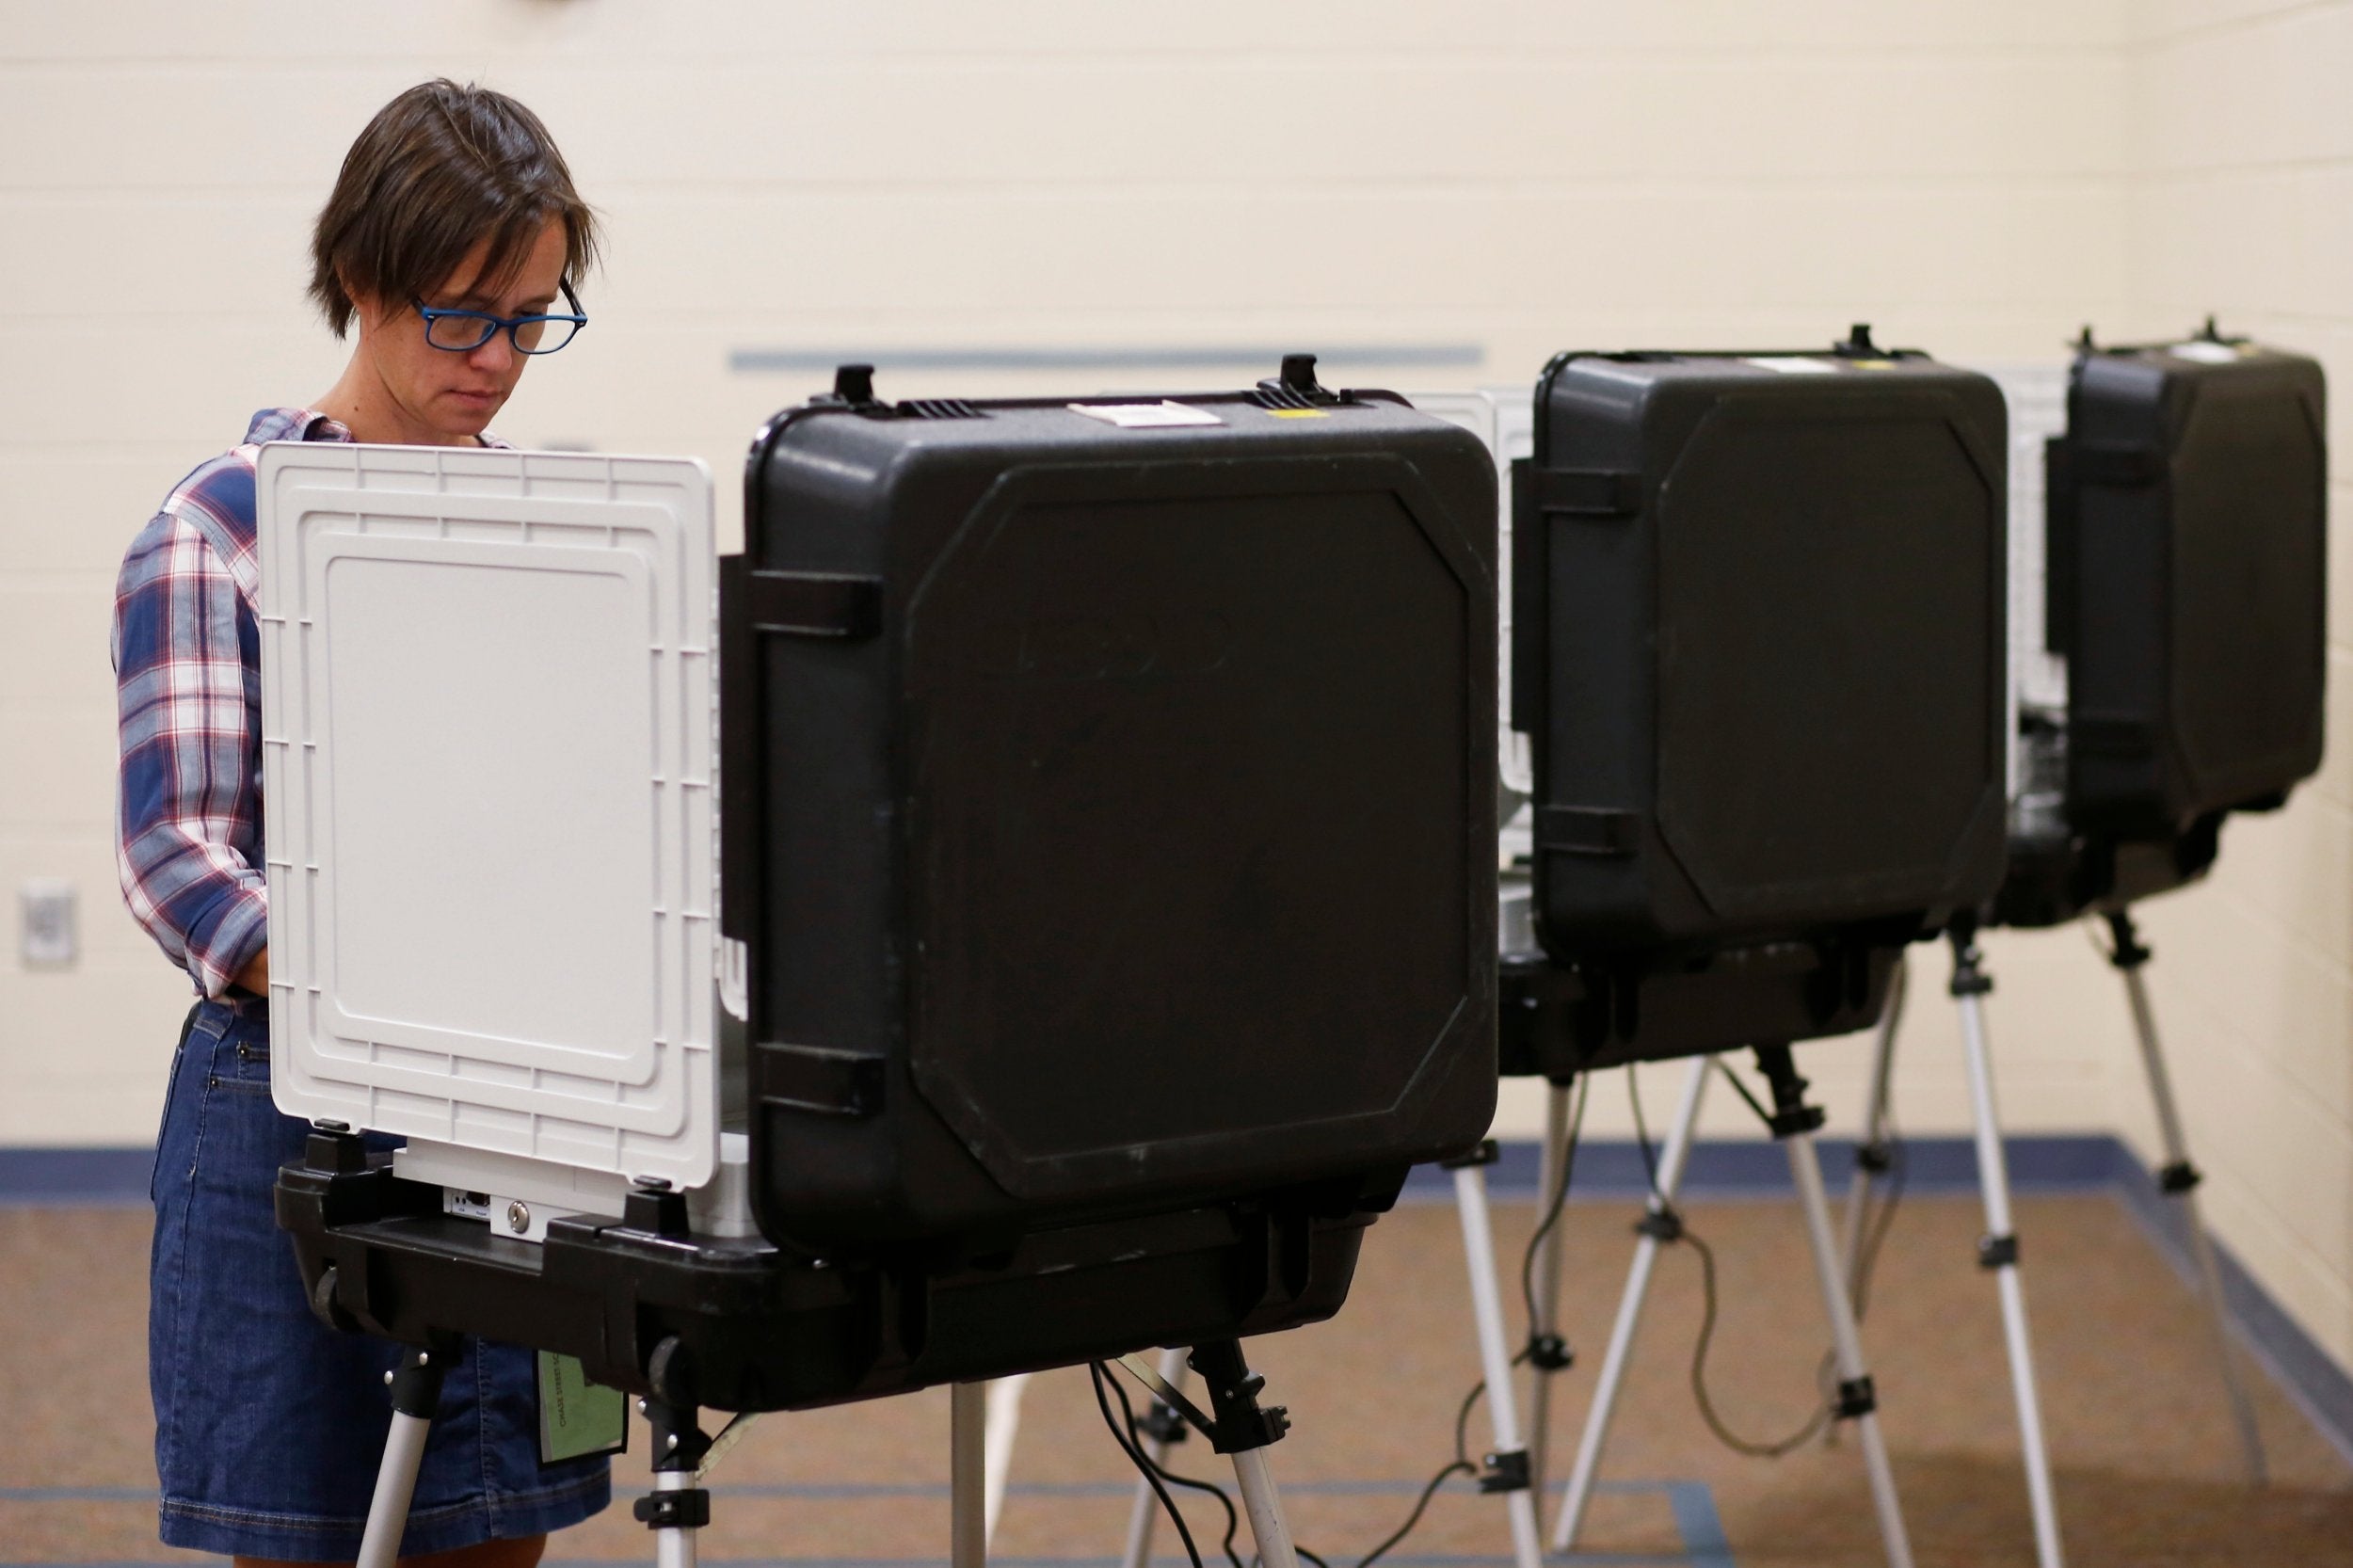 A voter casts their vote during an American primary election